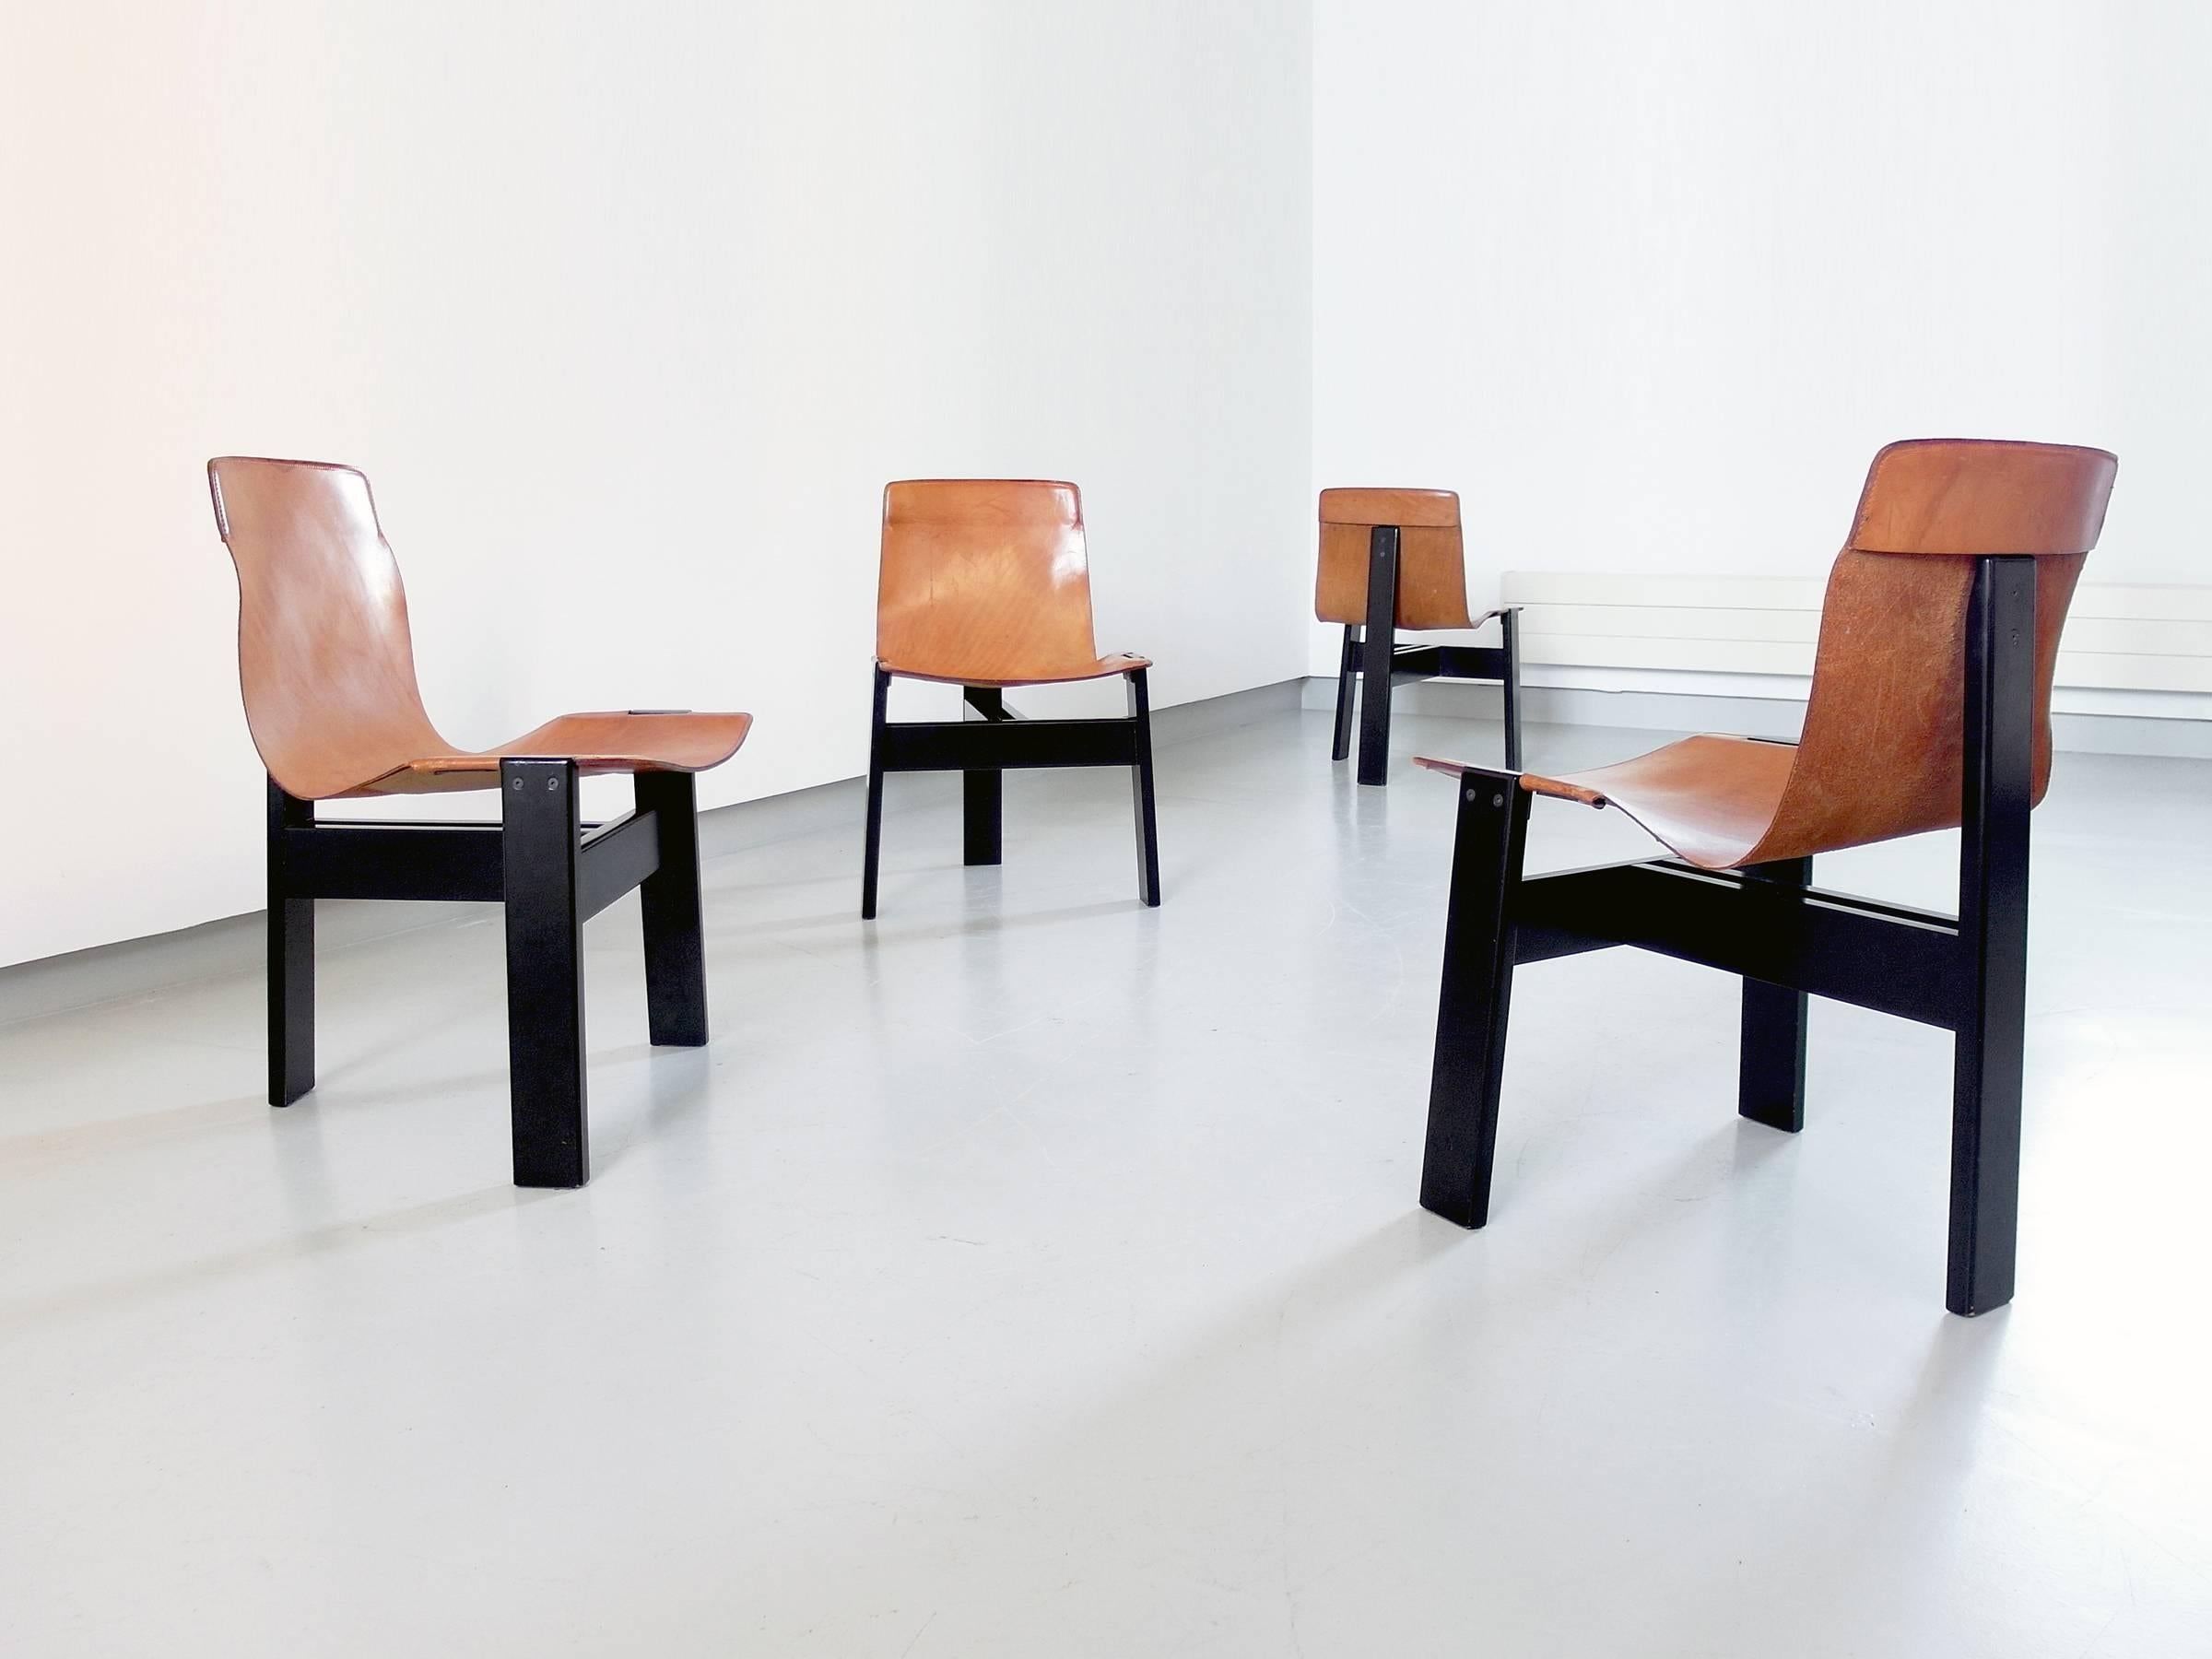 A unique and rare set of four original Tre three dining chairs designed by Angelo Mangiarotti for Skipper, Italy, 1978.
Comfortable dining chairs featuring simple but elegant construction details. The leather seat has been placed in the high rear